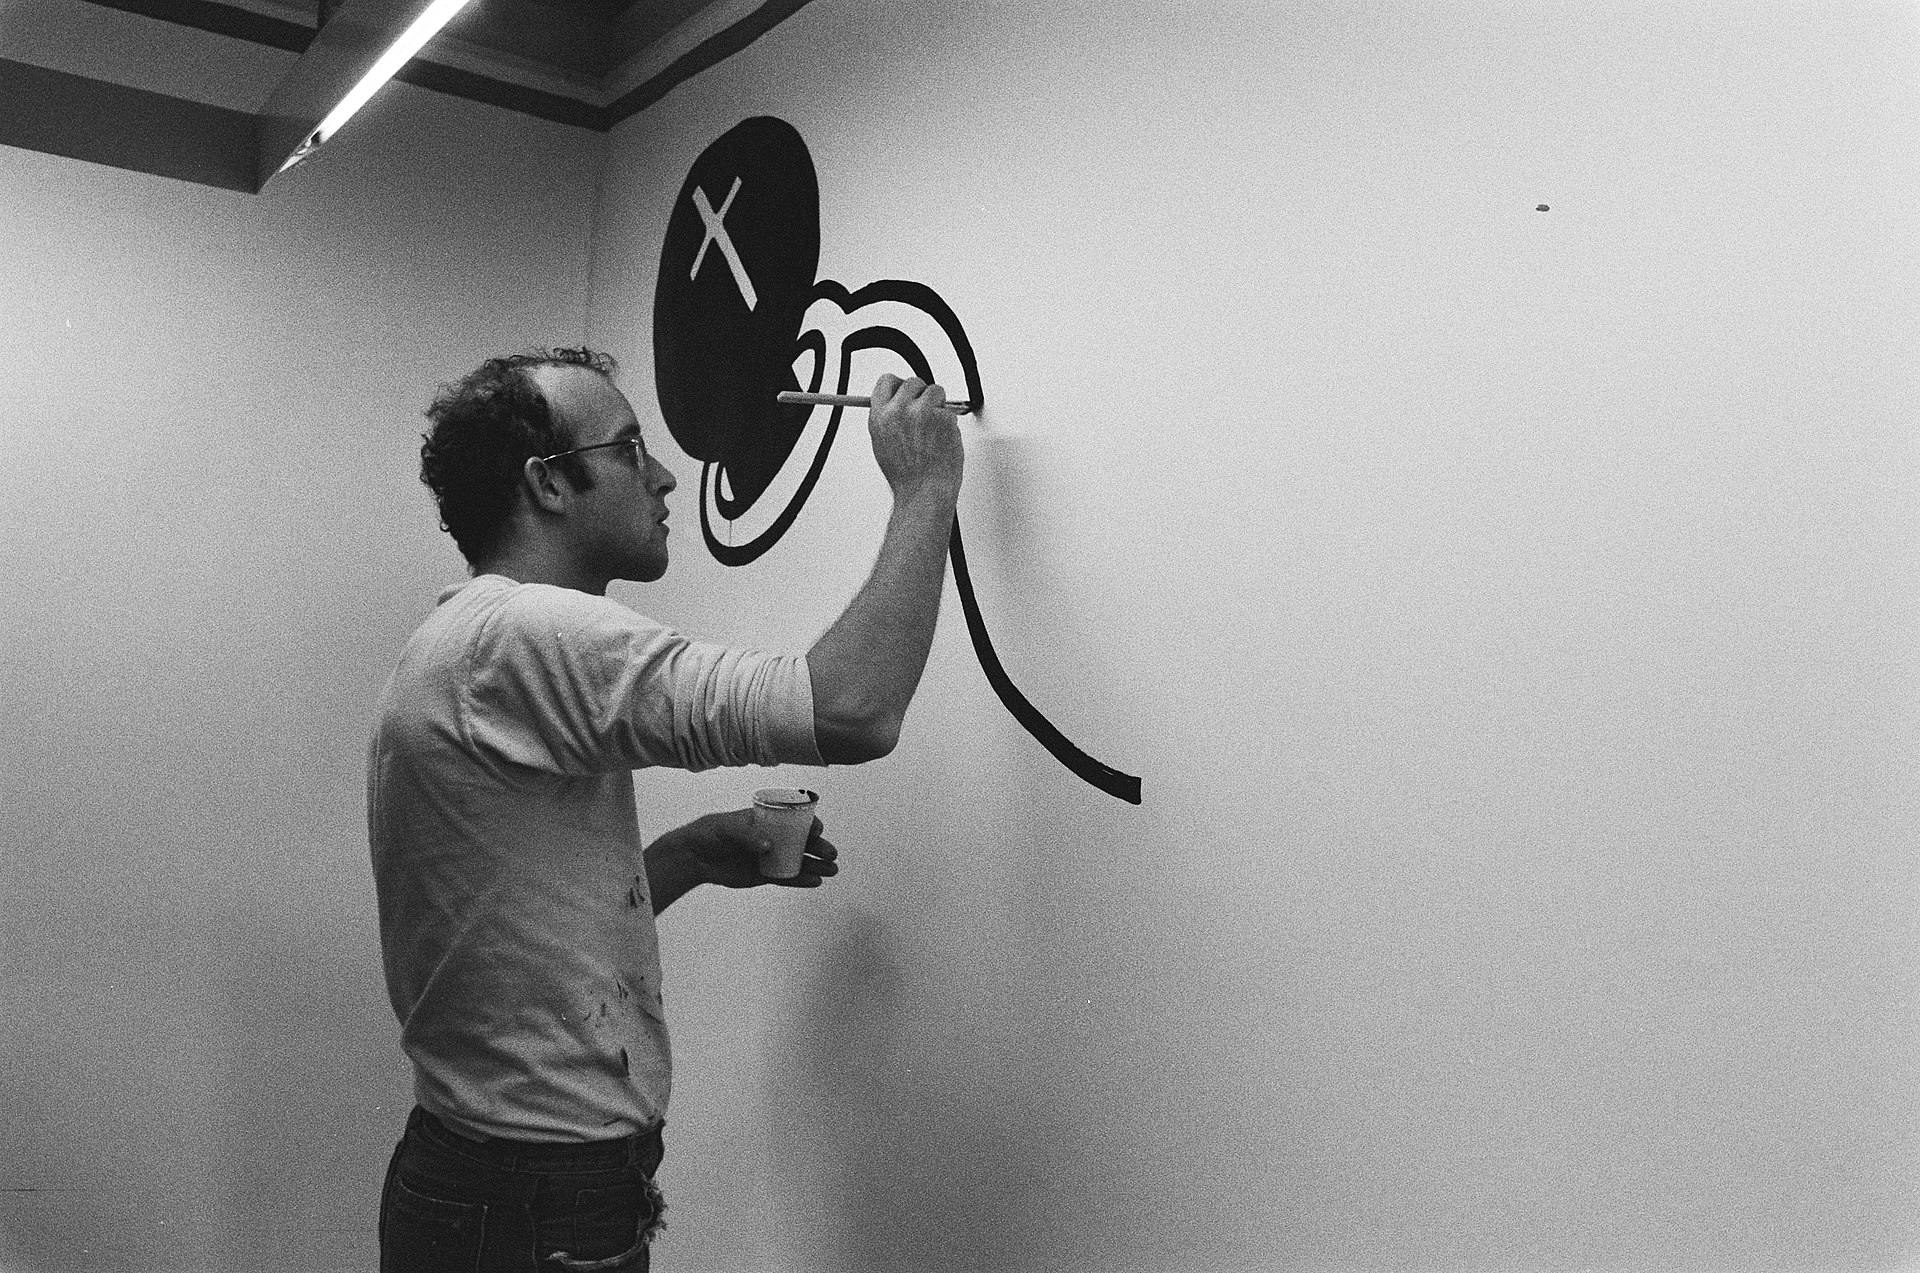 Keith Haring: ‘Art is for everybody’